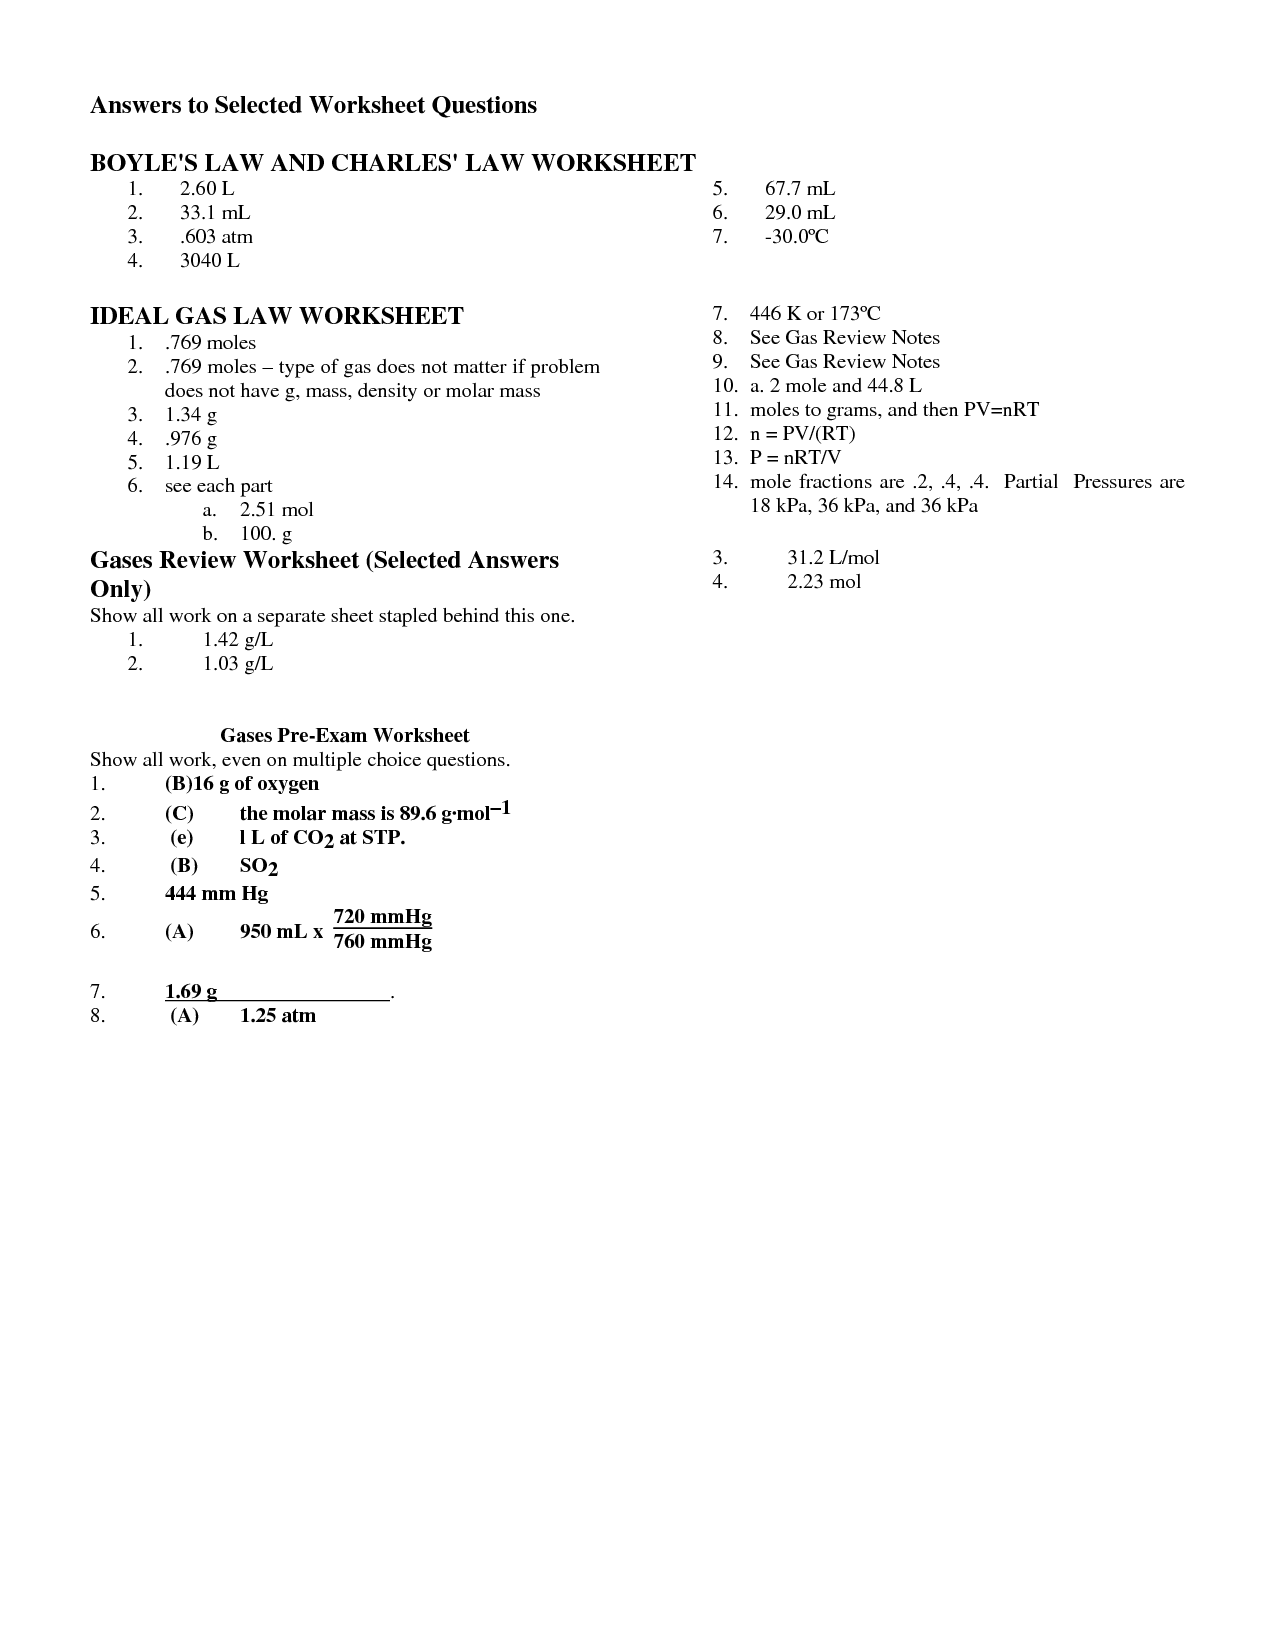 15 Best Images of Charles Law Worksheet With Answers  Ideal Gas Law Worksheet Answers, Charles 